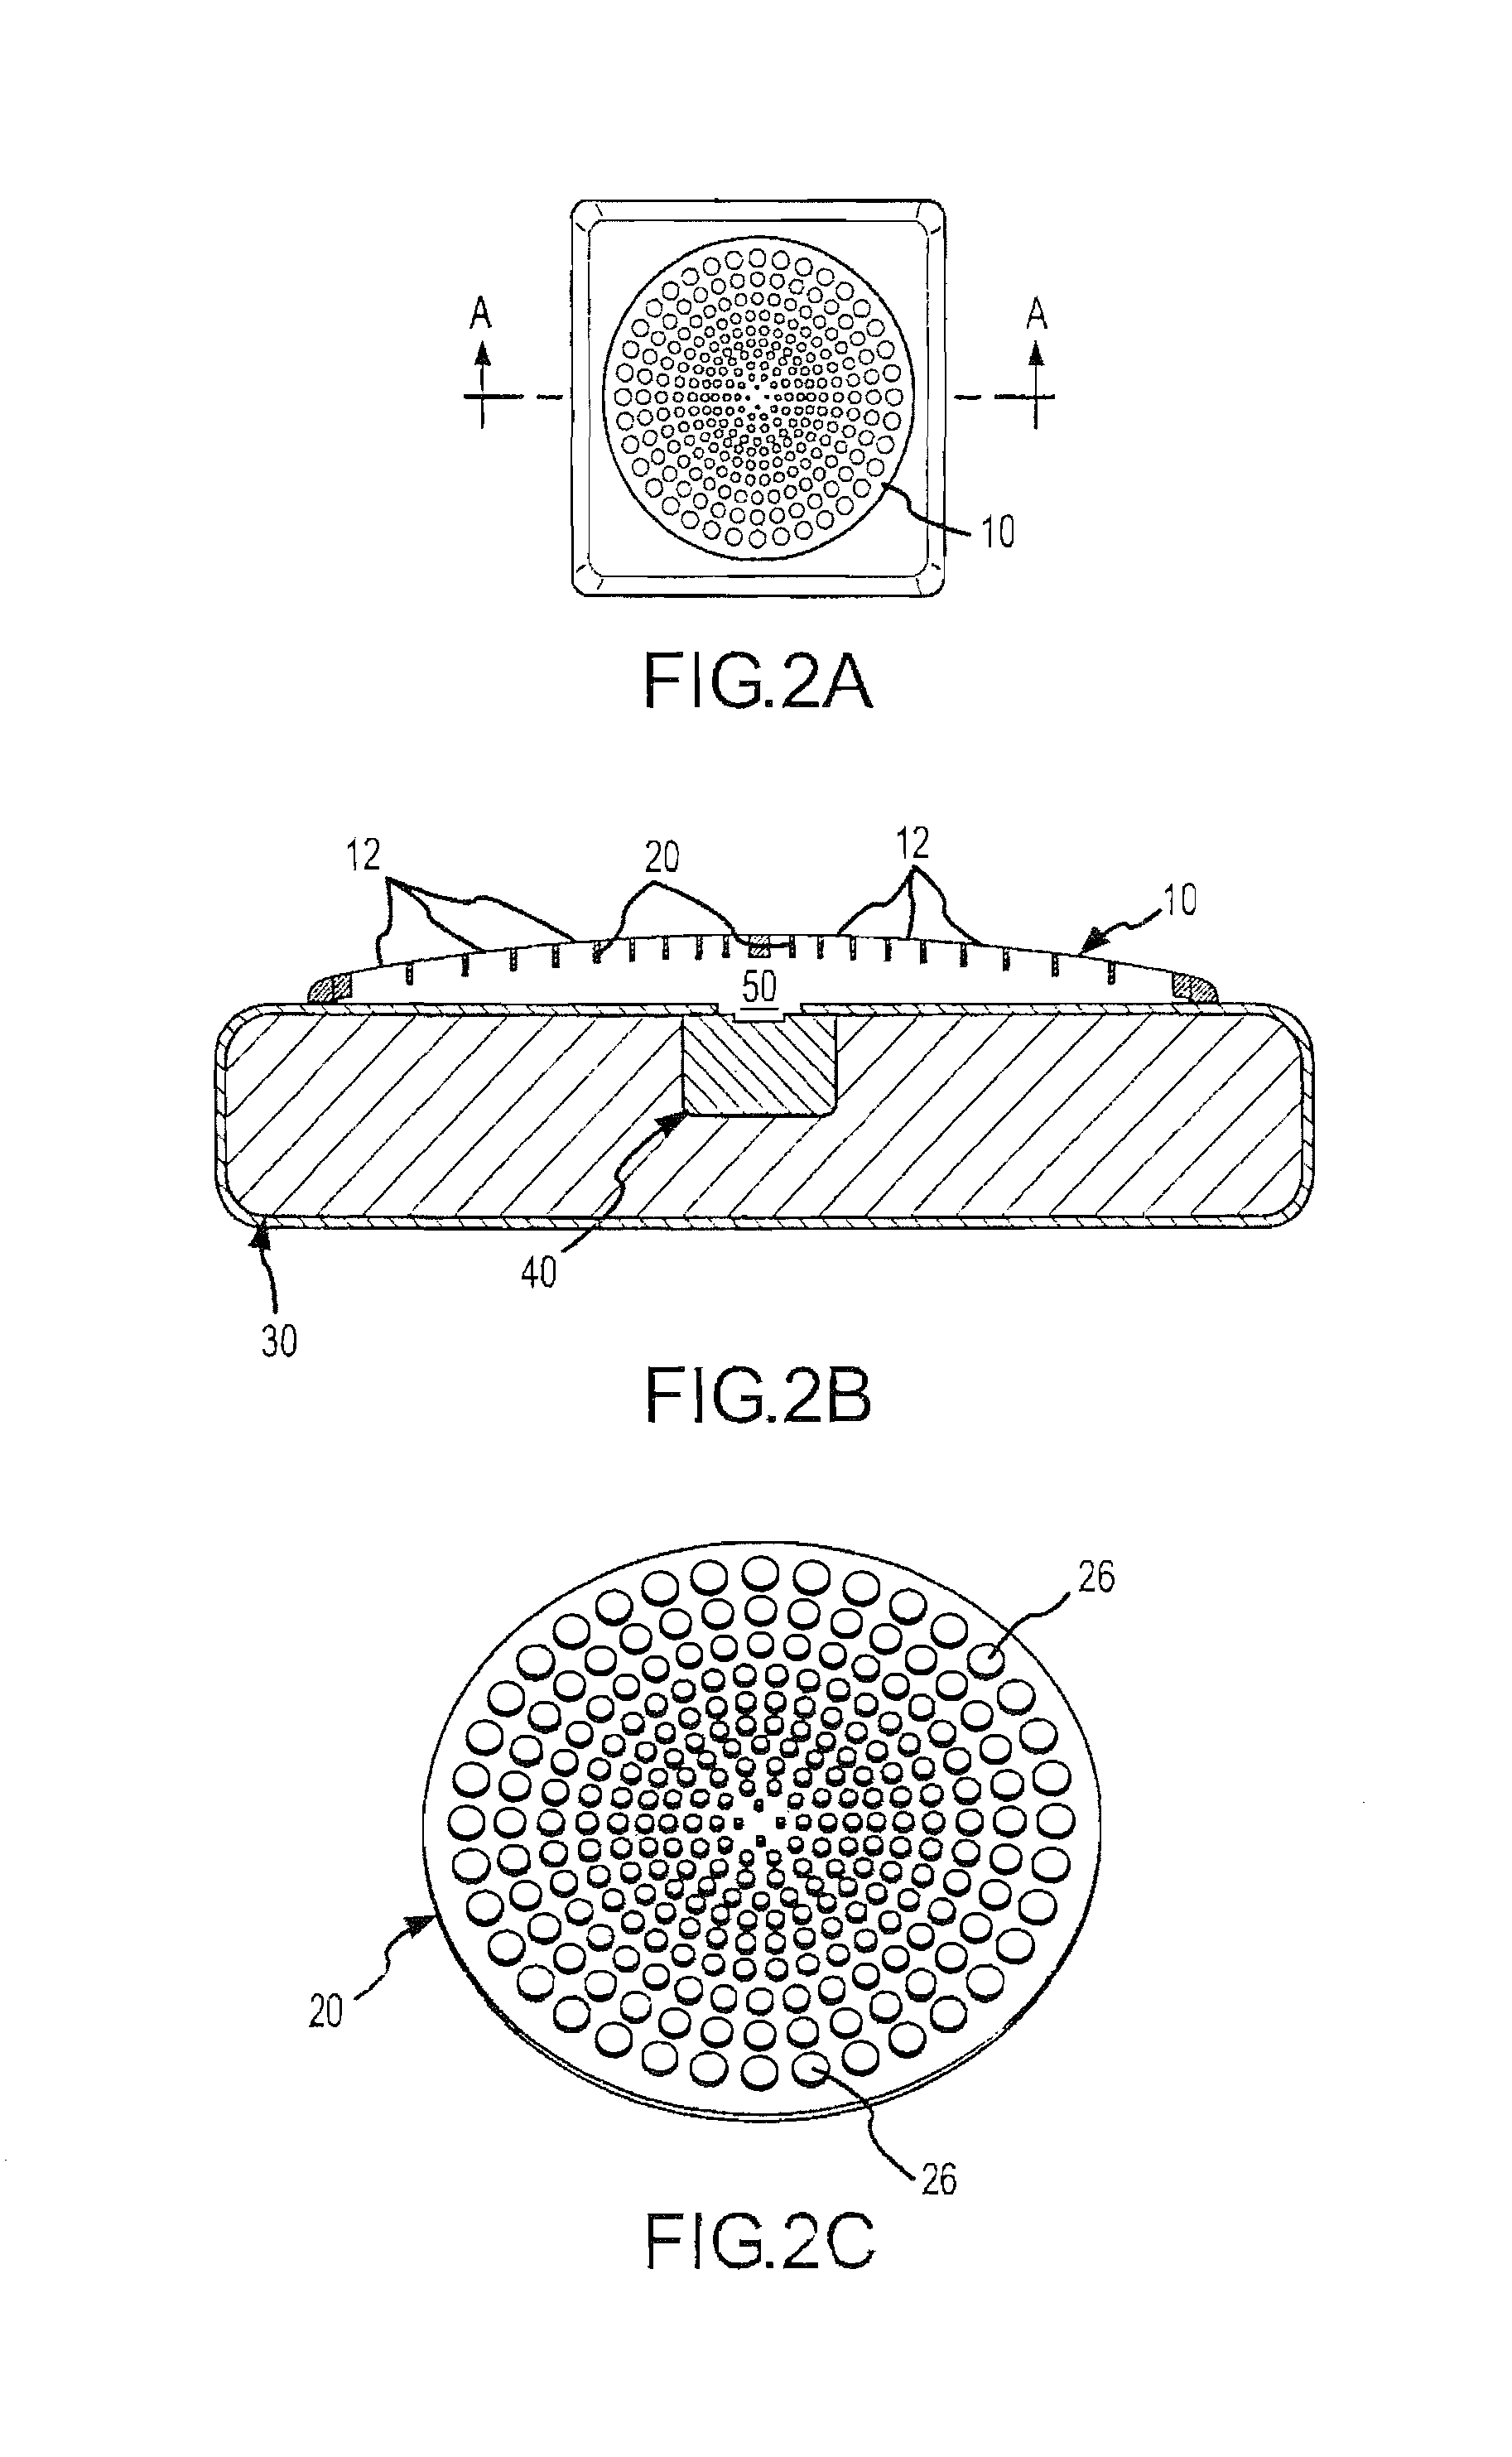 Microphone optimized for implant use